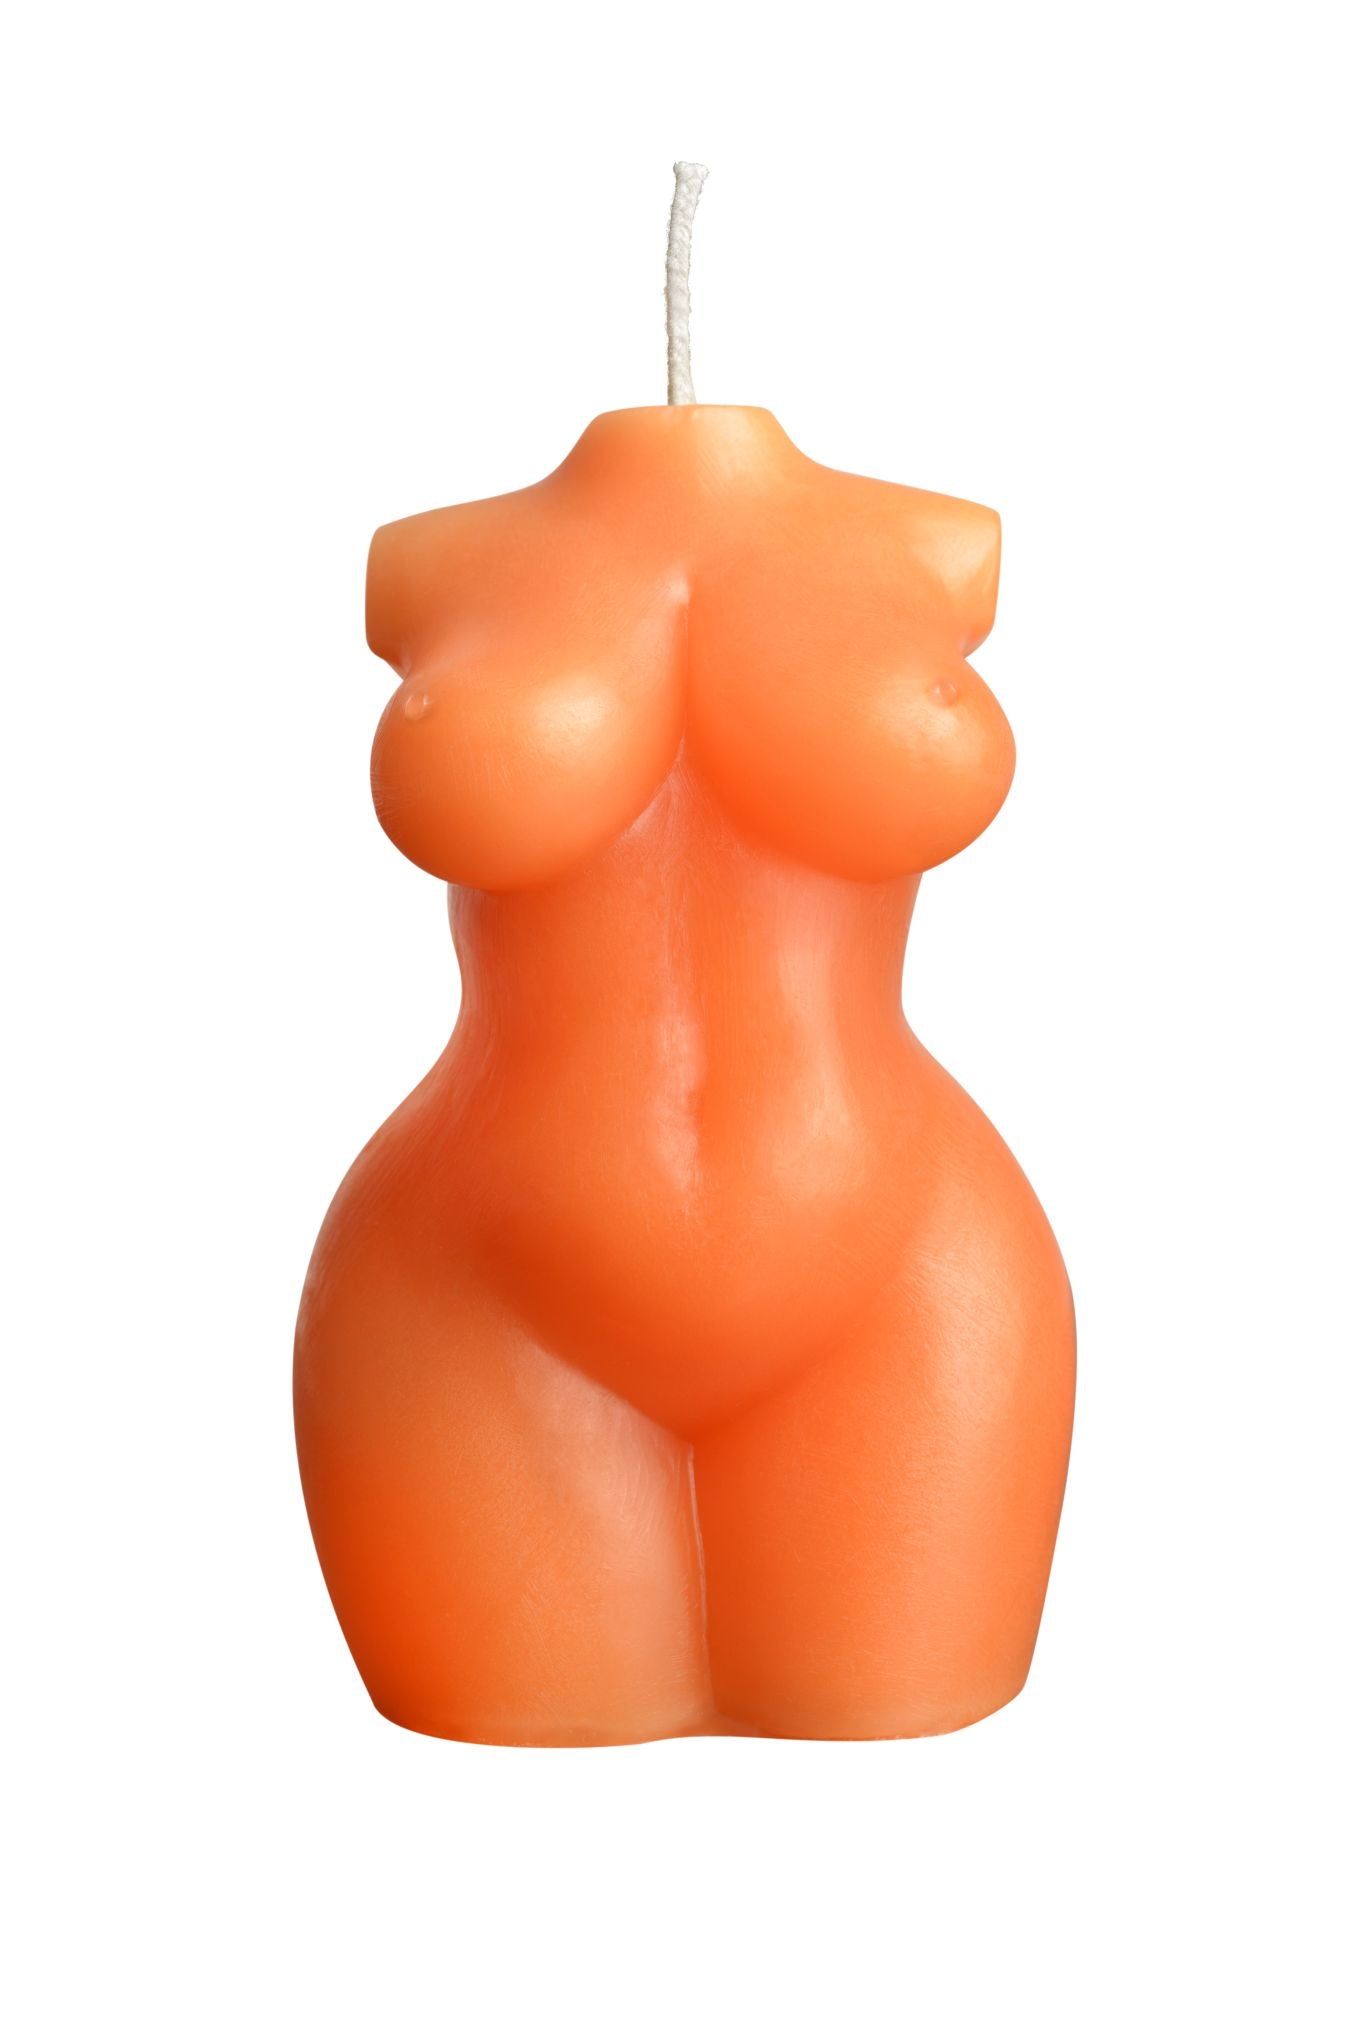 Front view of the LaCire Torso Candle from Sportsheets (form 1/orange) shows its natural female form.